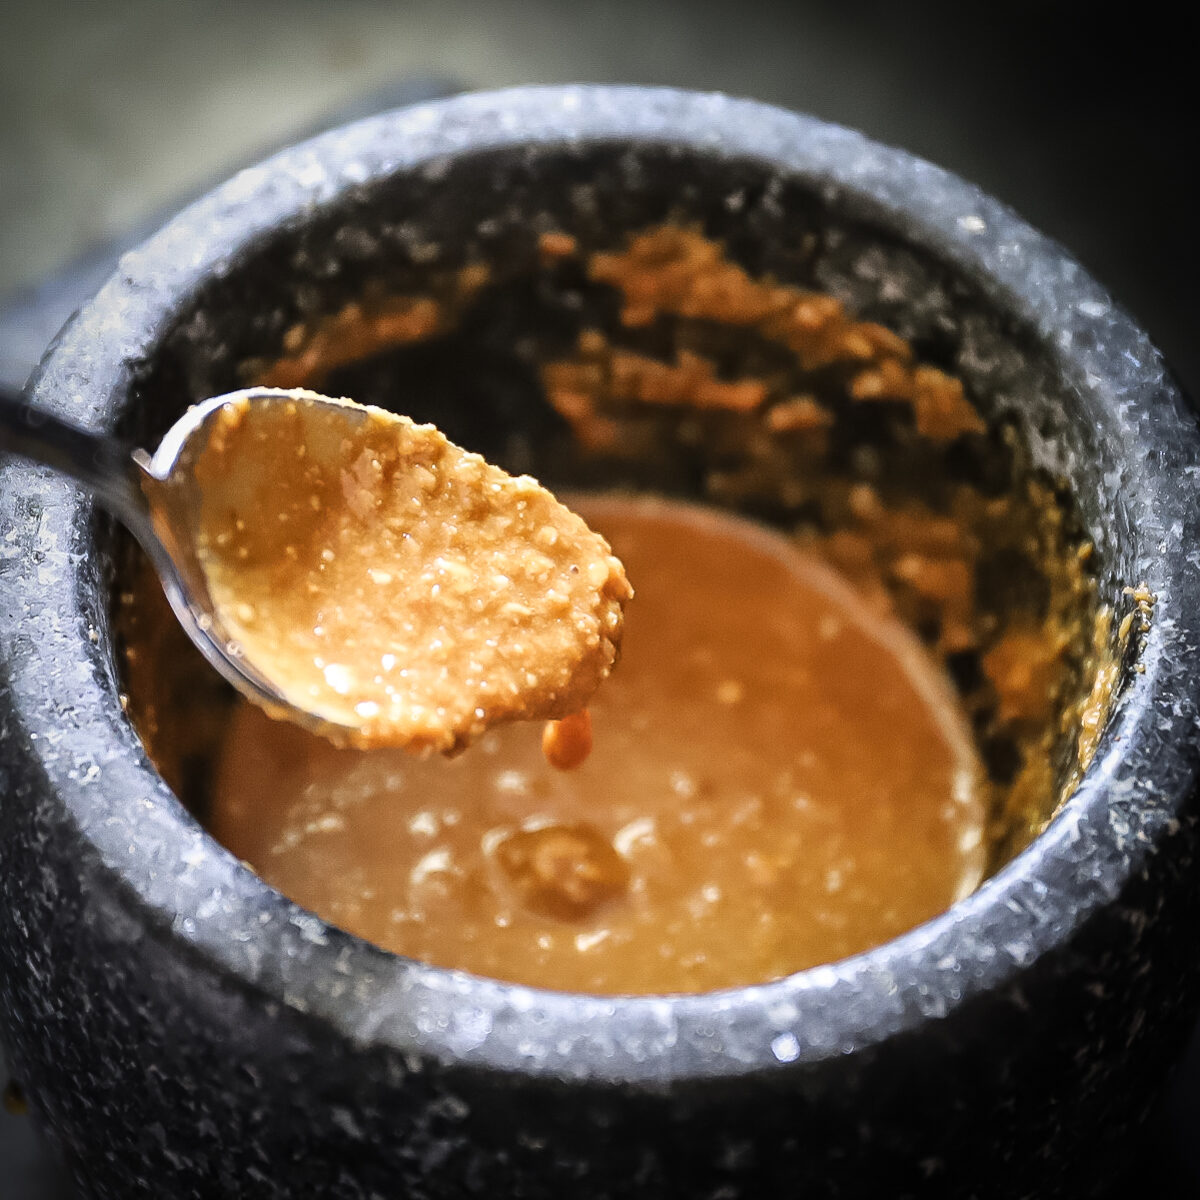 A spoon held up is dripping goma dressing to show the consistency of the sesame seed mixture.